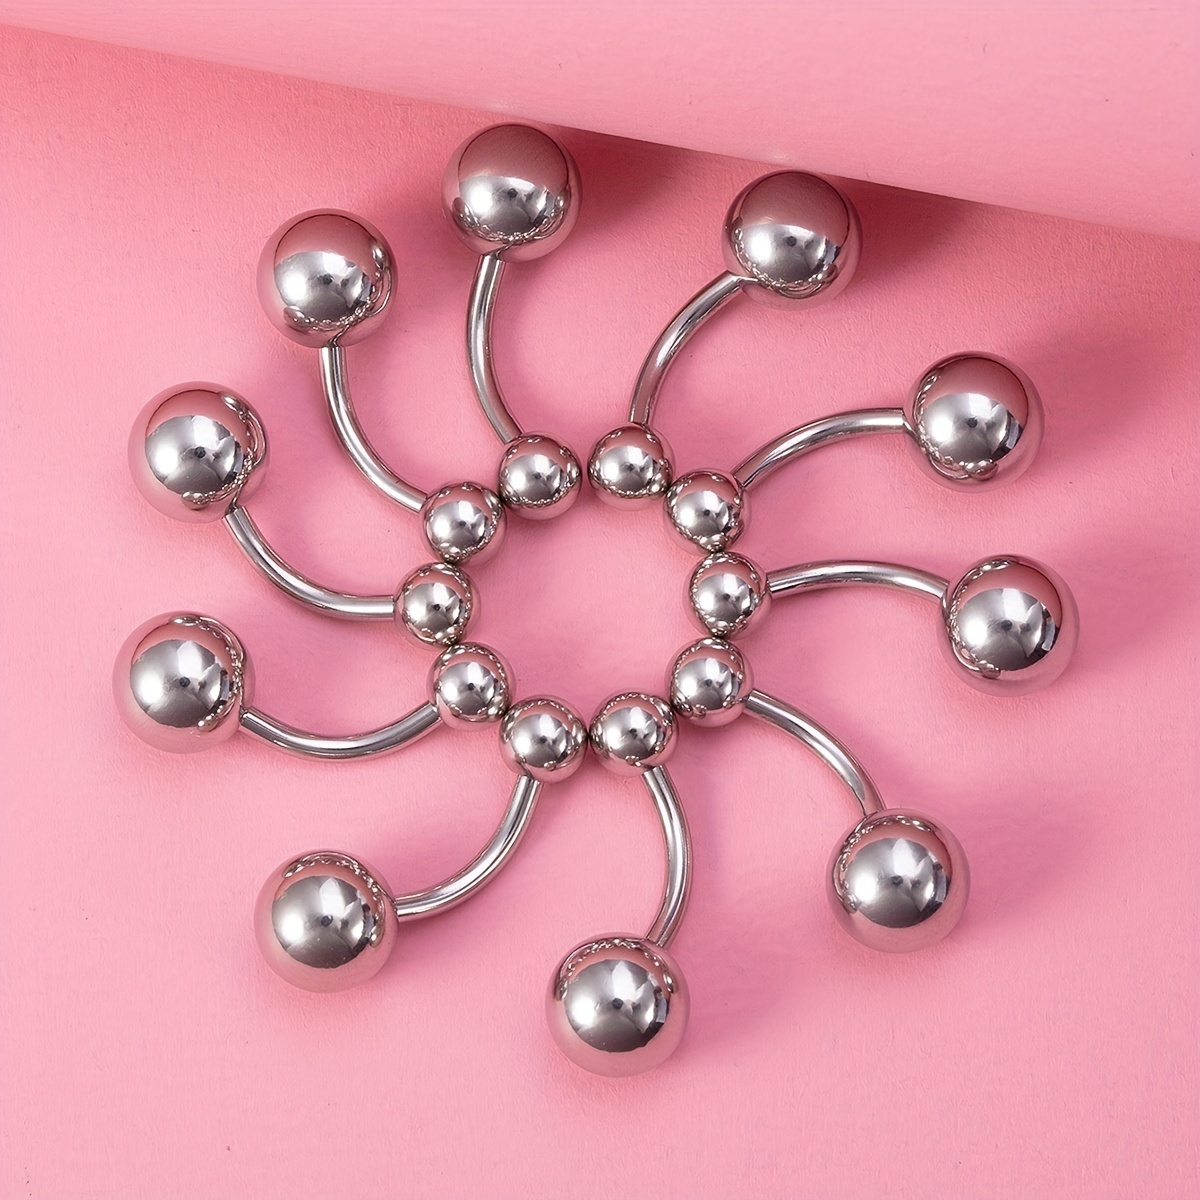 Belly Button Rings & Belly Bars for Women